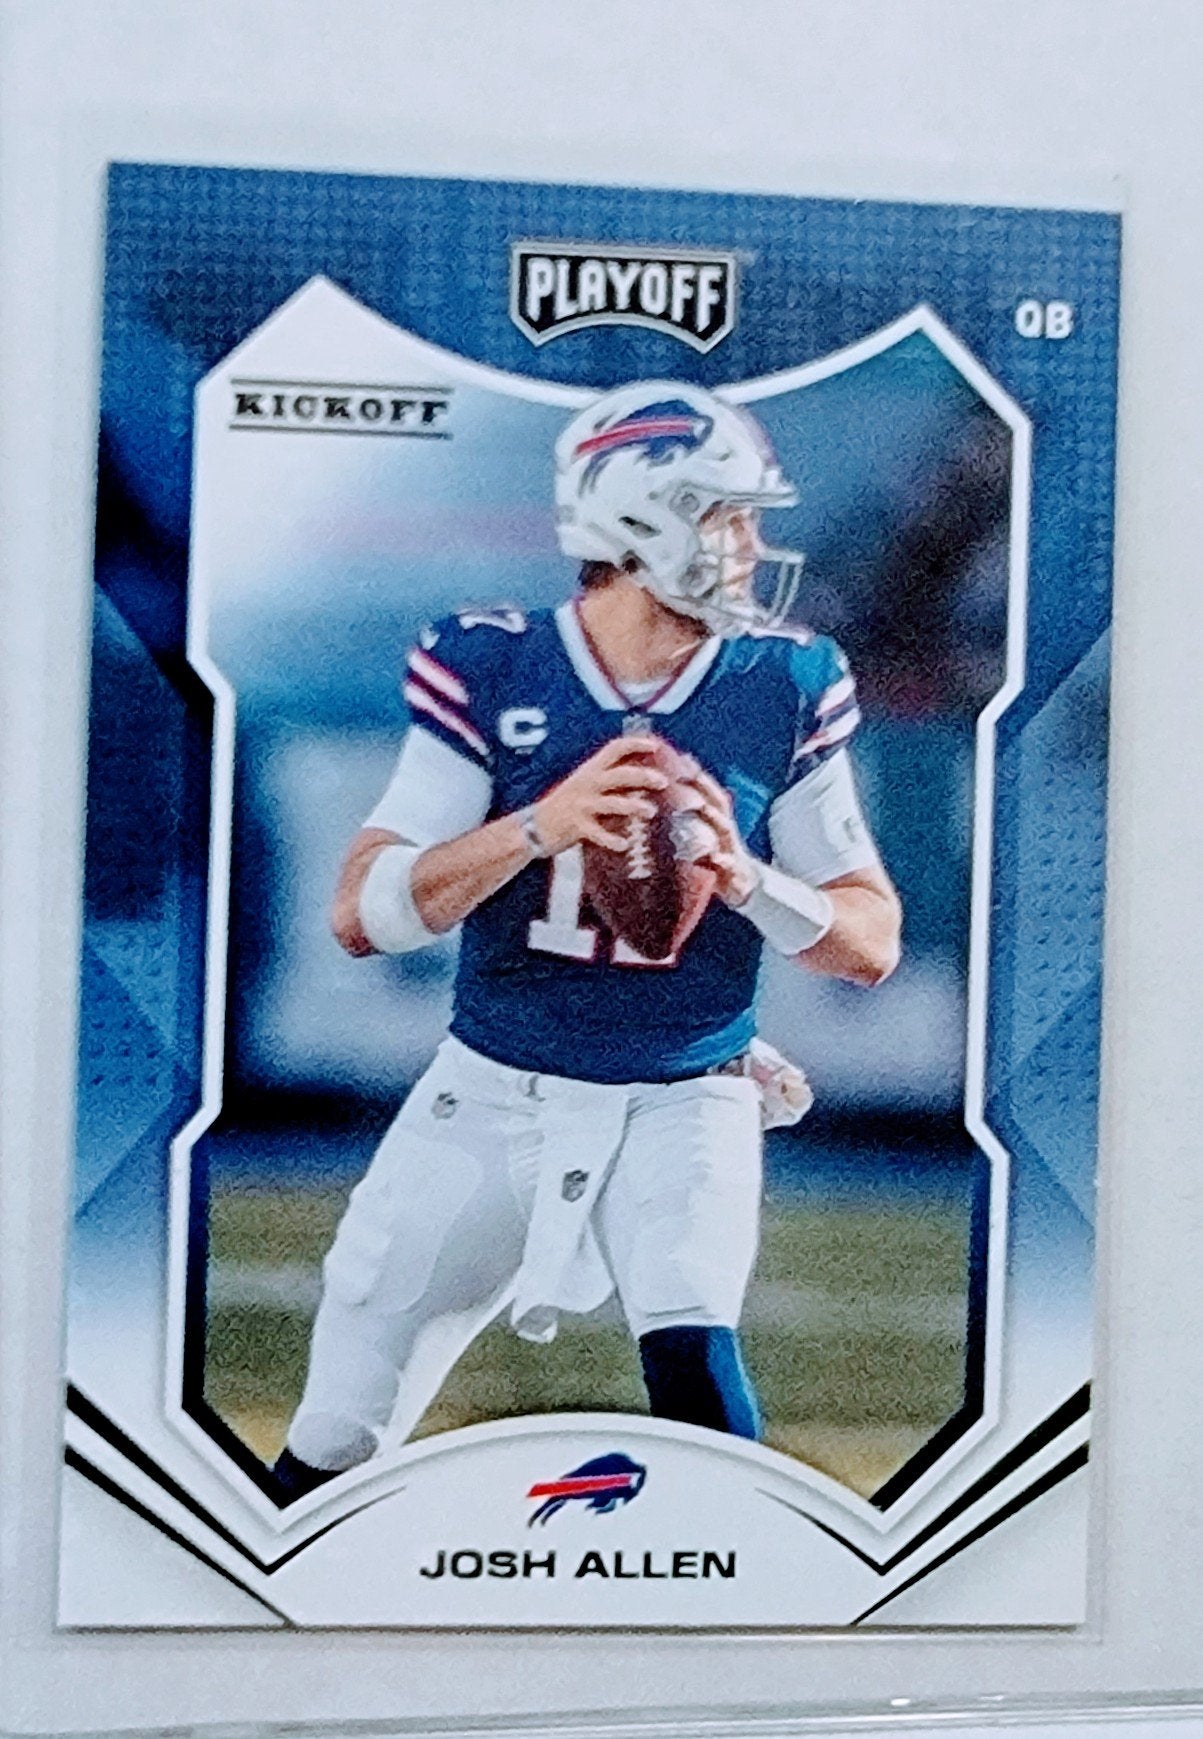 2021 Panini Playoff Josh Allen Kickoff Insert Rookie Football Card AVM1 simple Xclusive Collectibles   